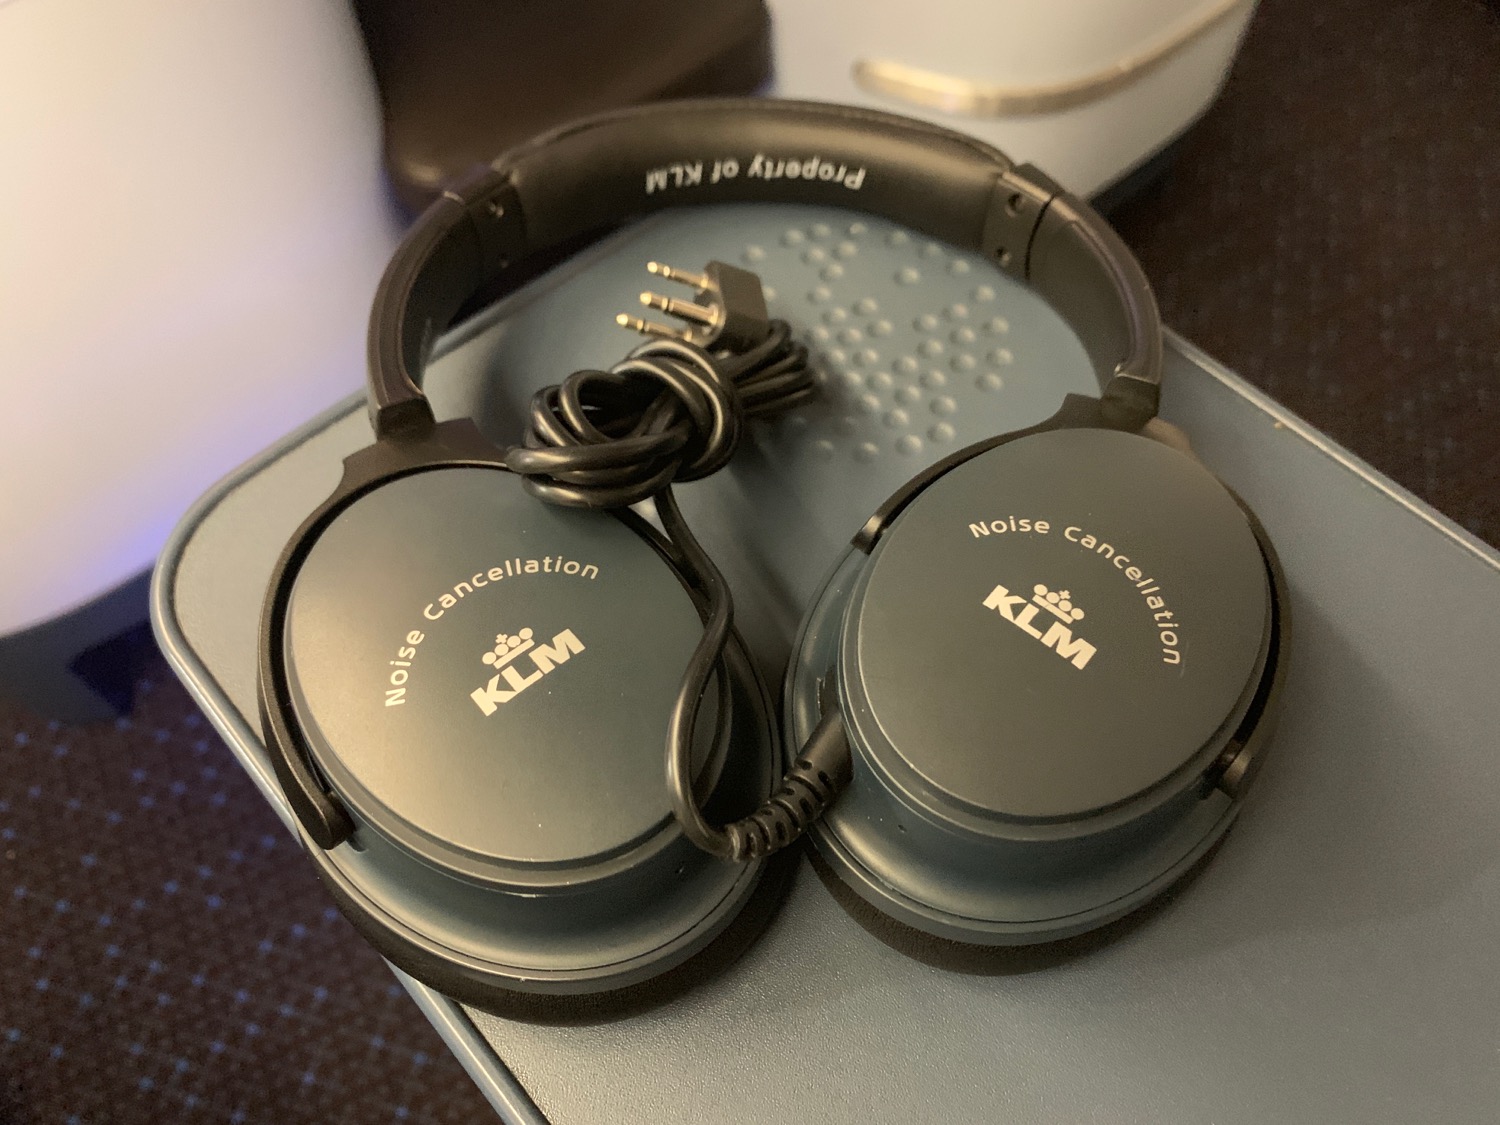 a pair of headphones on a grey surface